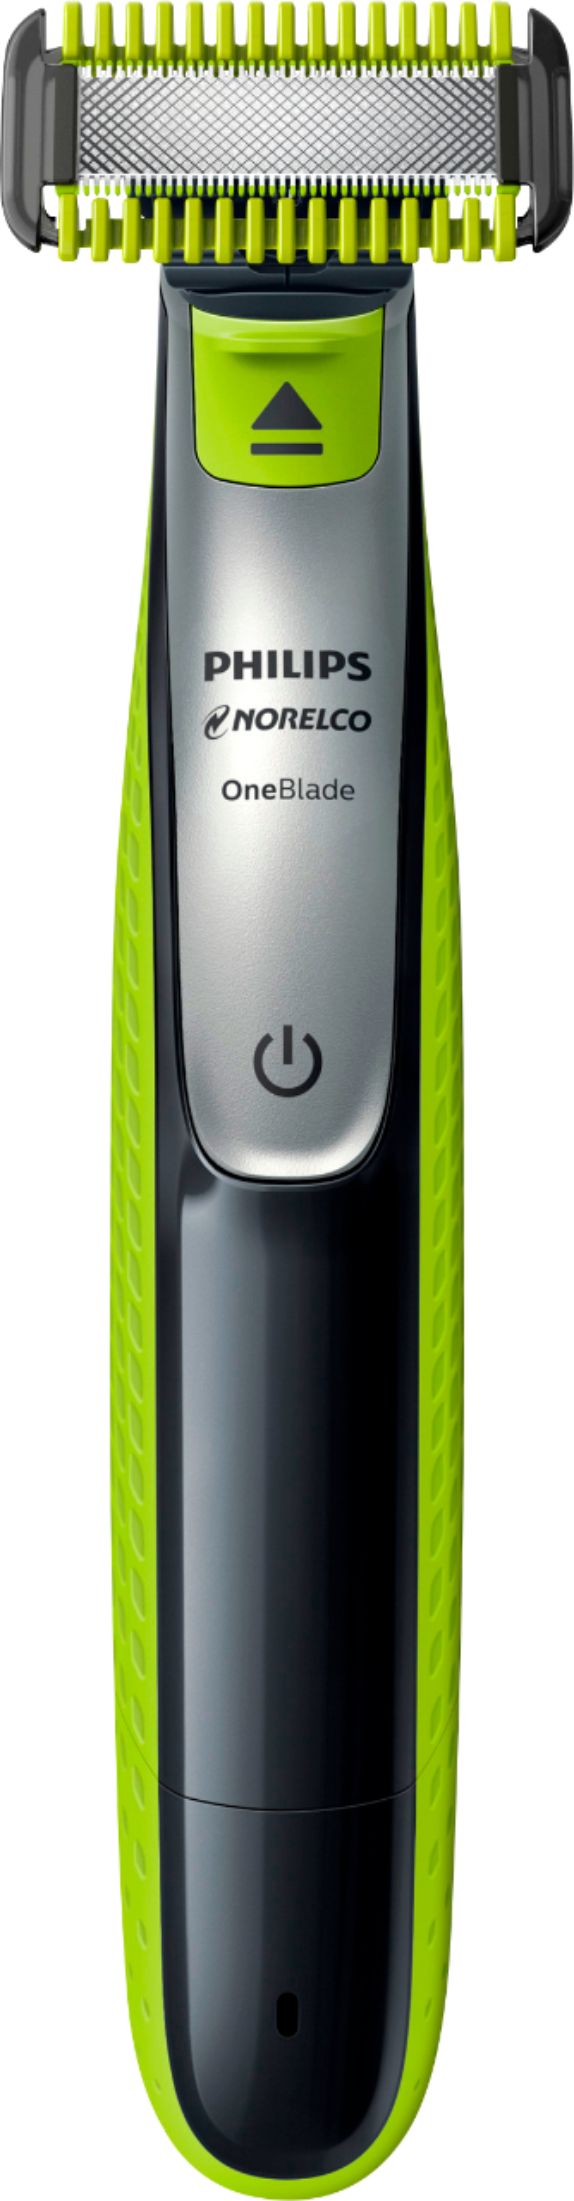 steeg Verrijken Ontwapening Philips Norelco OneBlade Face + Body hybrid electric trimmer and shaver,  QP2630/70 Black, Green, Silver QP2630/70 - Best Buy